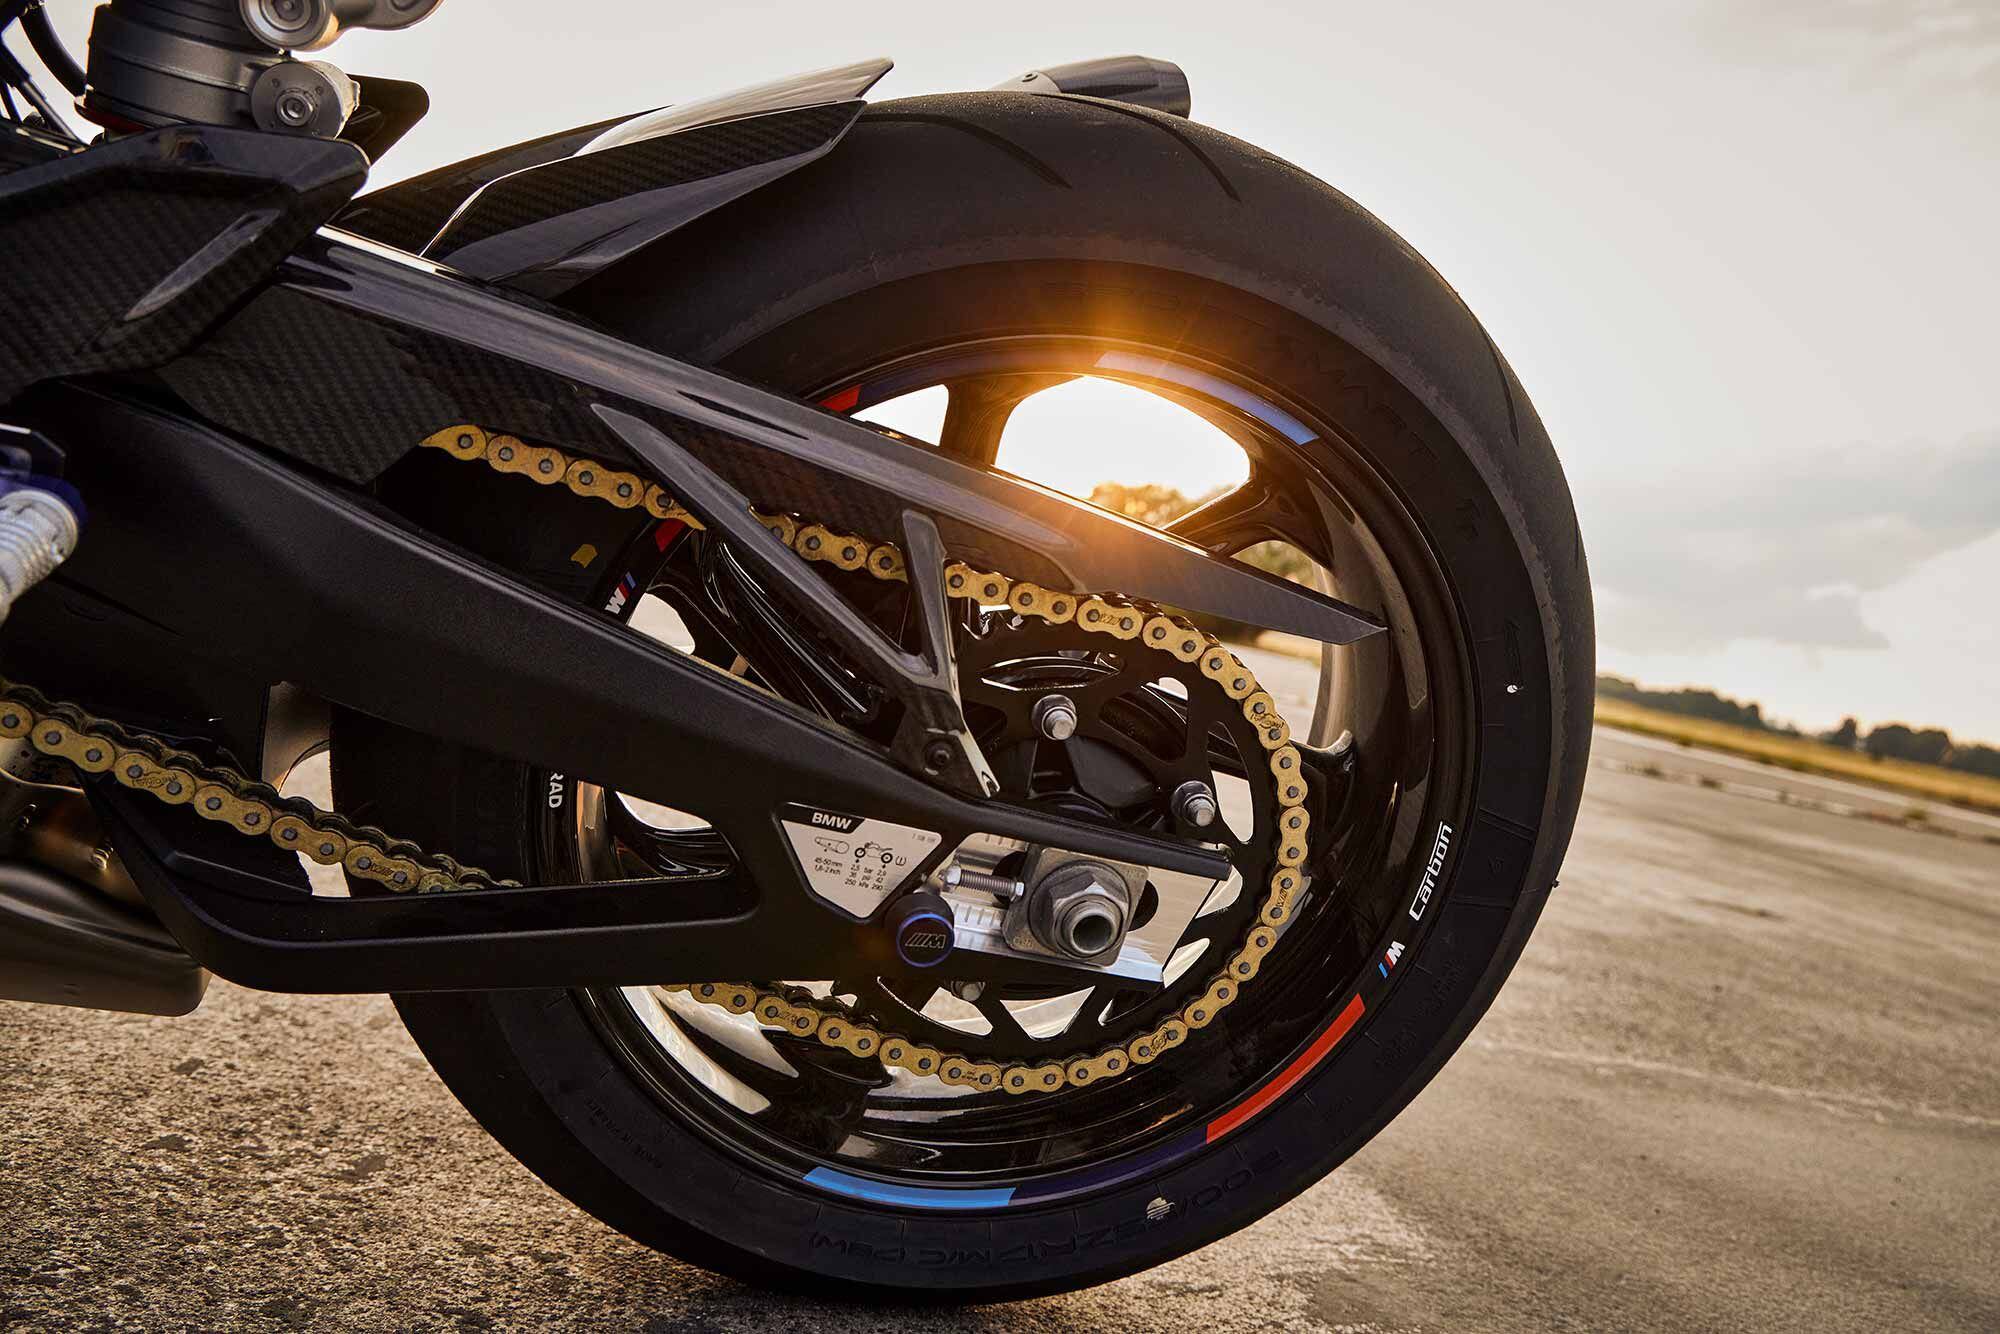 With adjustable rear shock and swingarm pivot point, riders can better tune the back-end geometry.